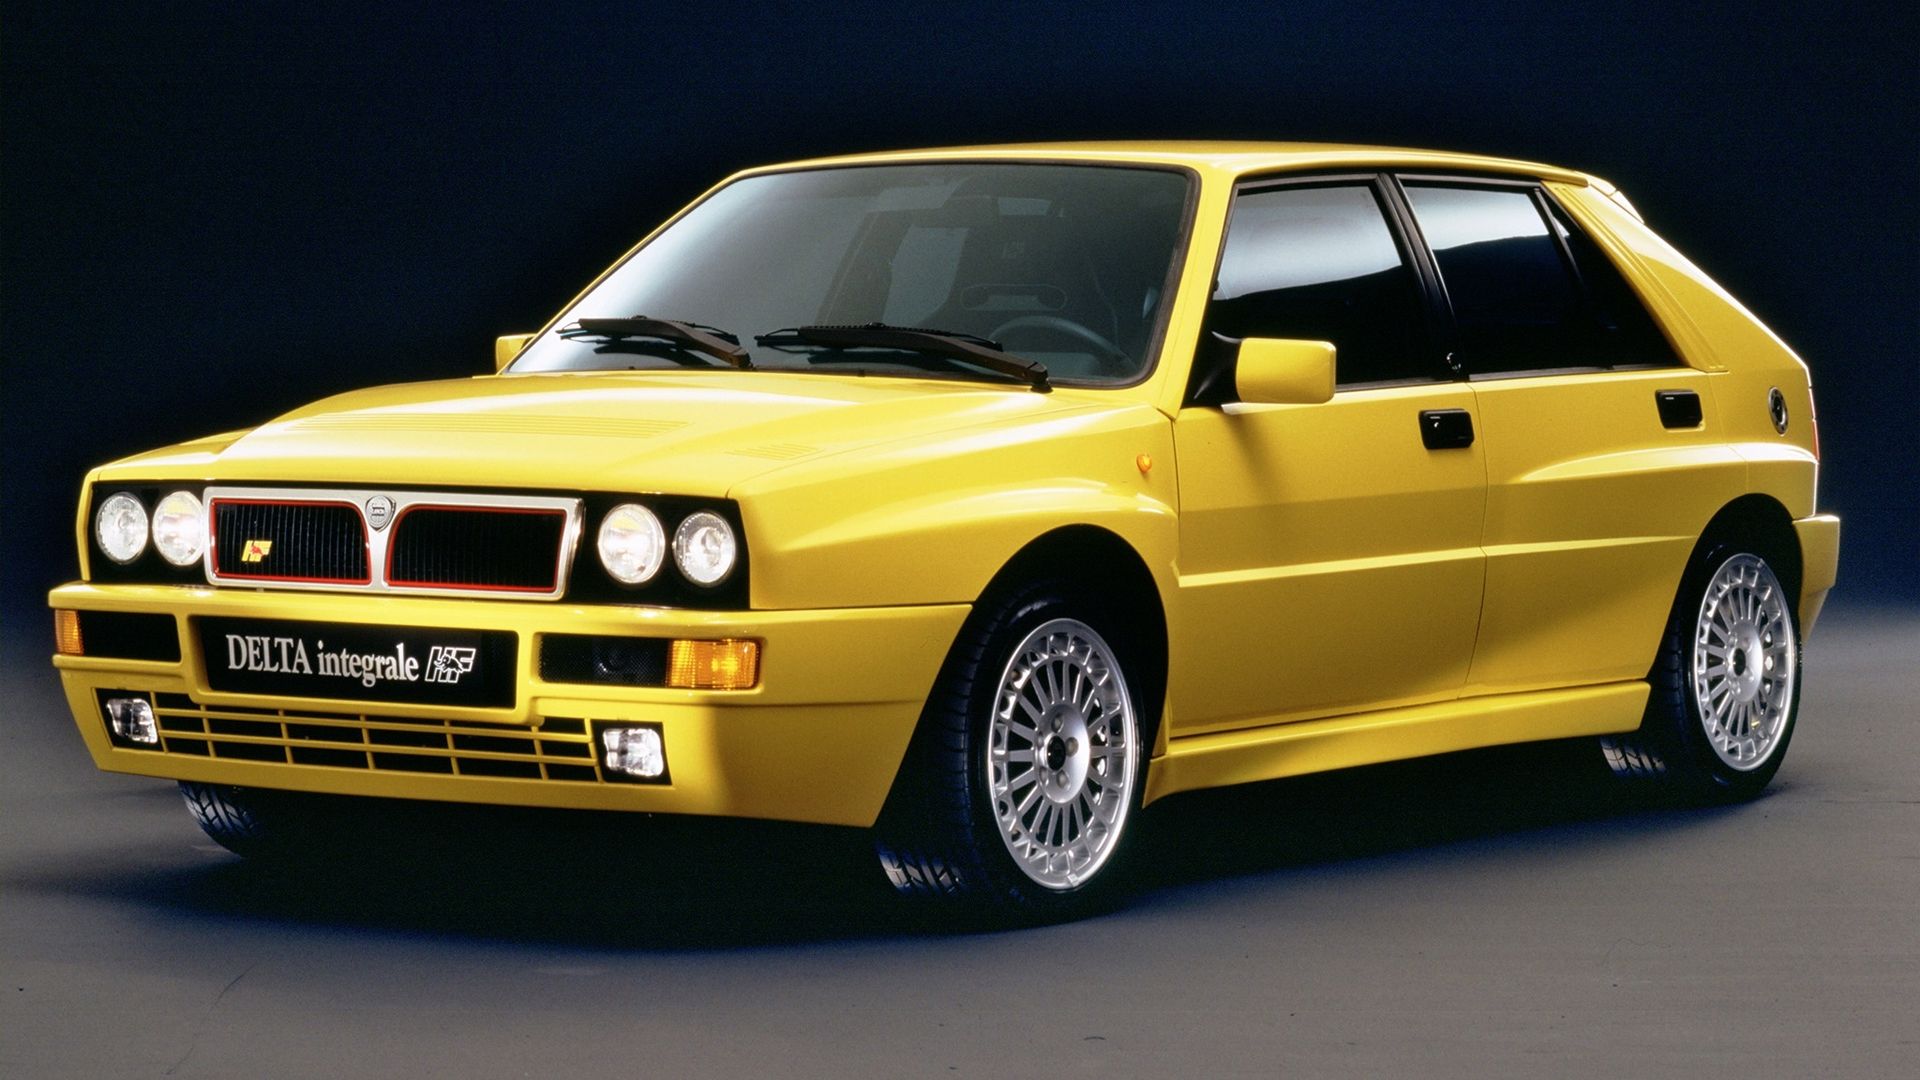 The front of a yellow Delta HF Integrale